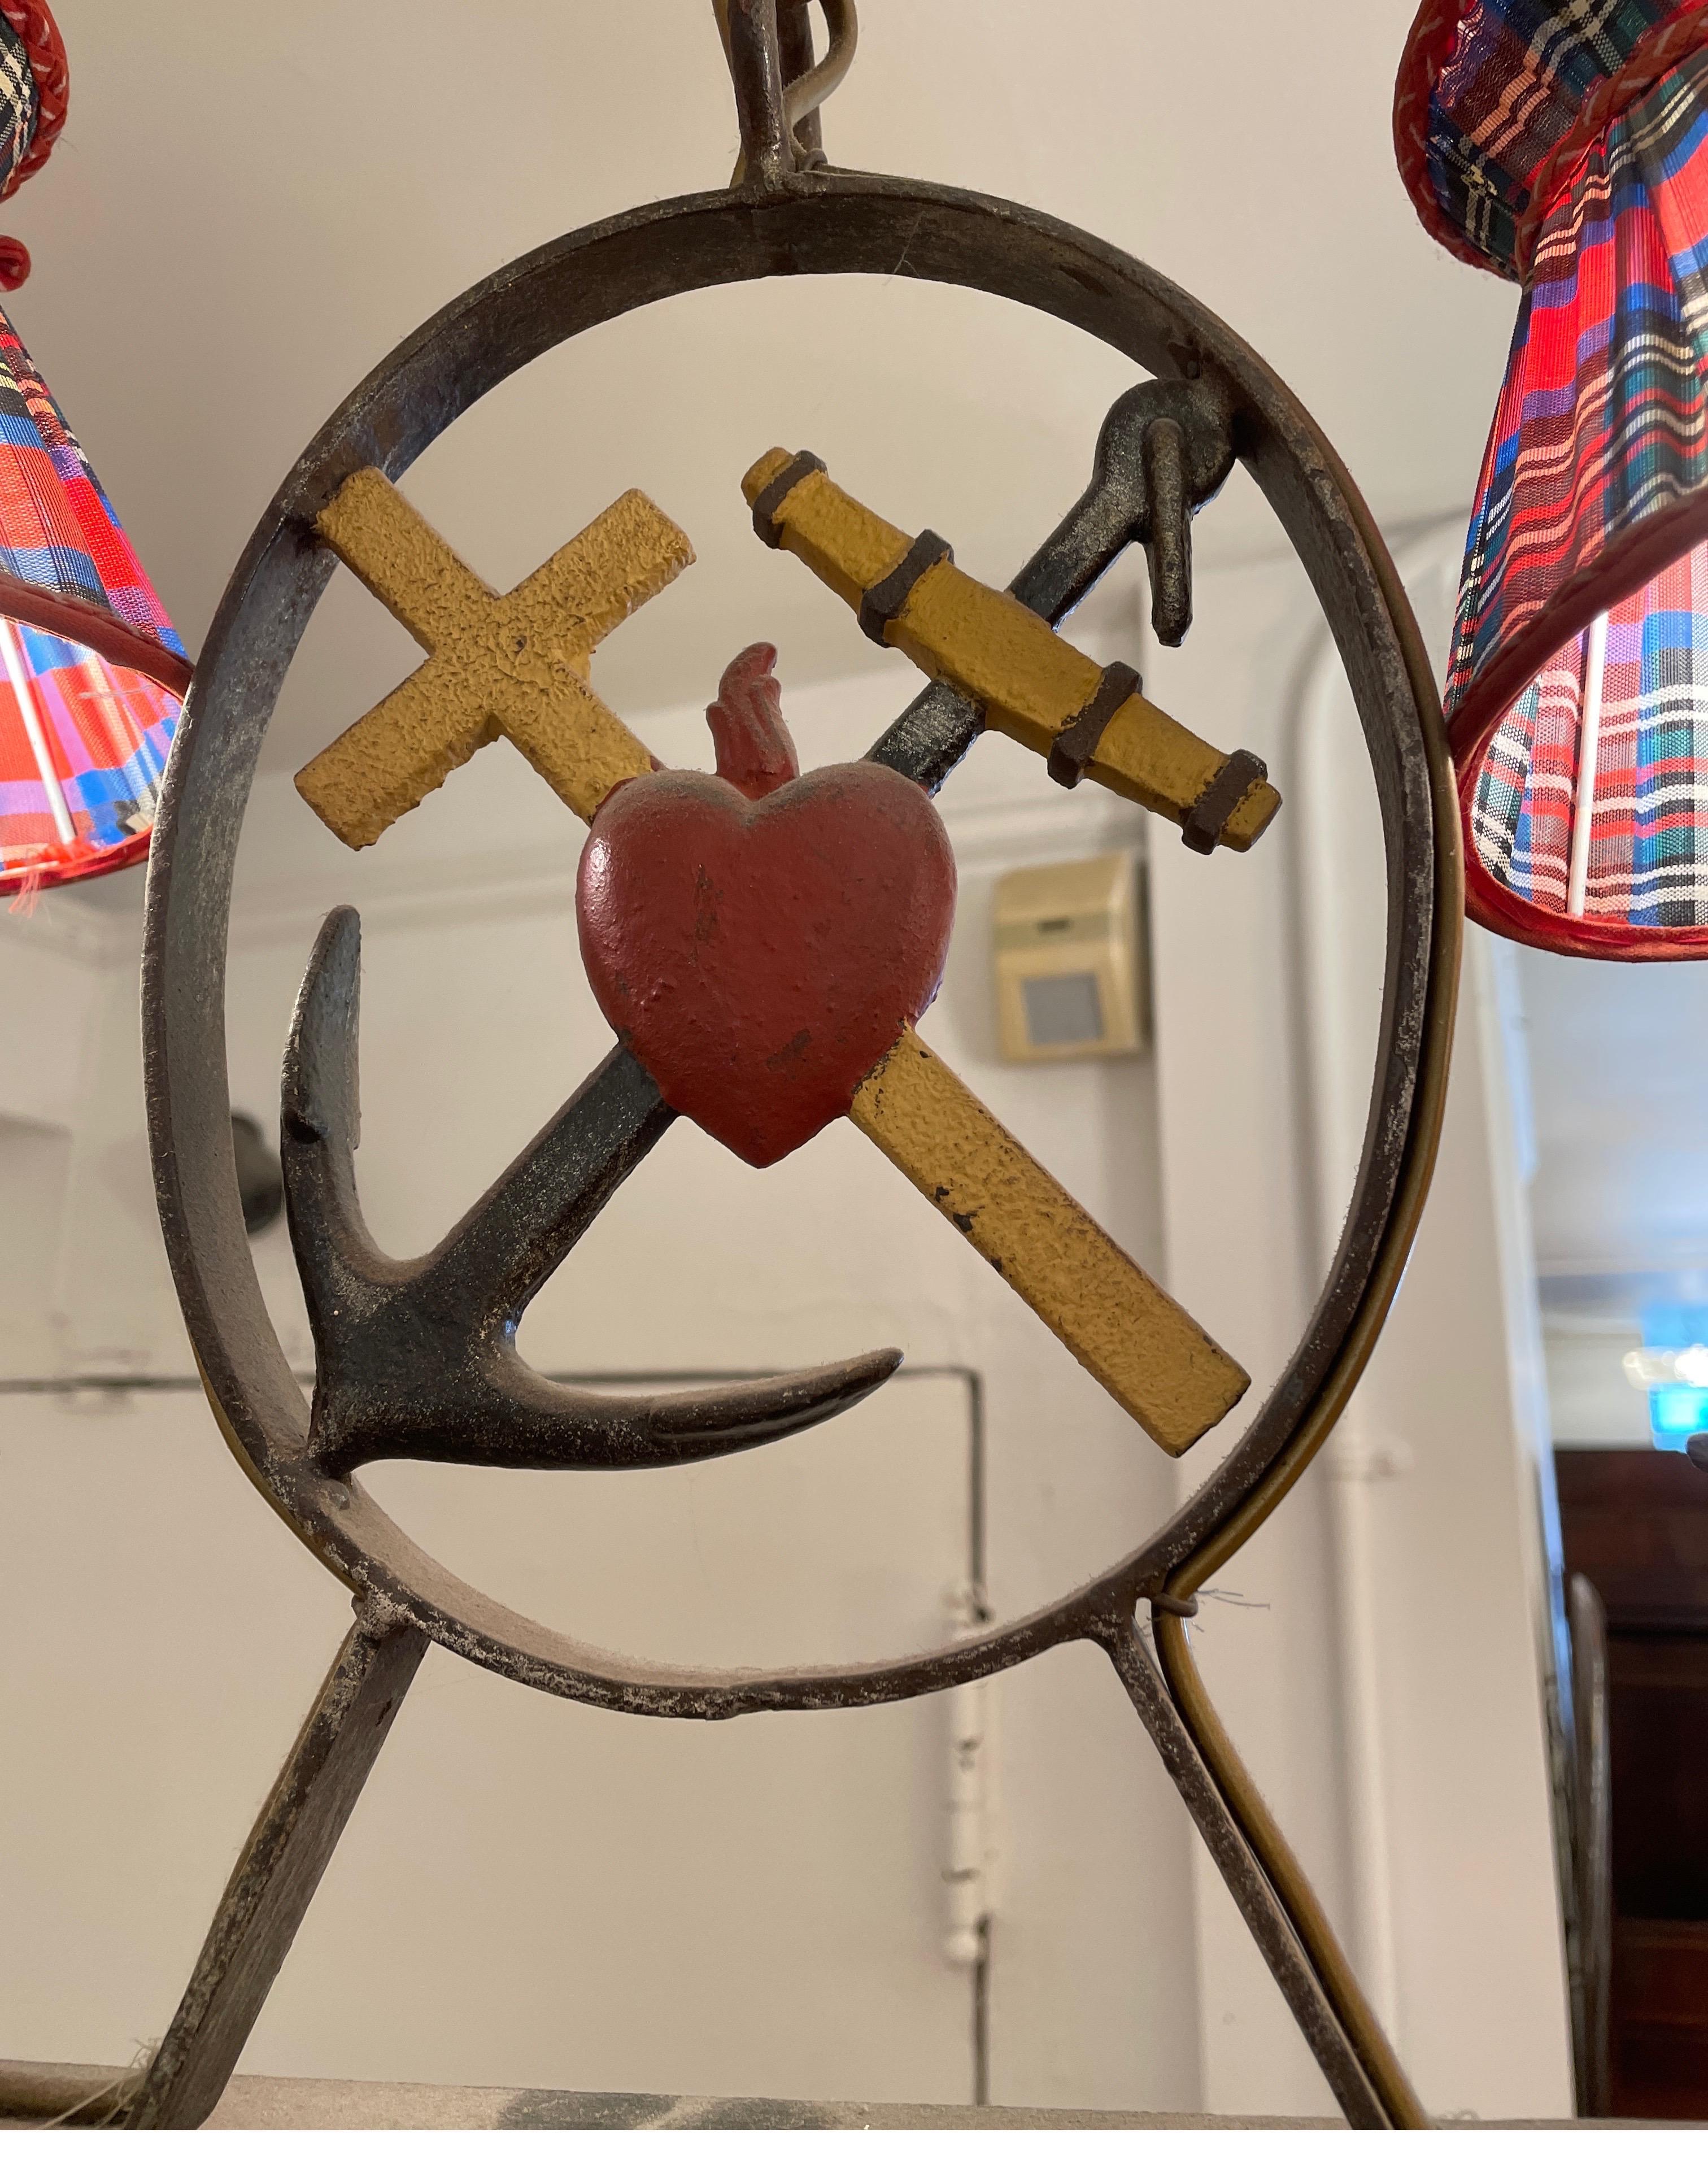 The Swedish shipbuilders' longtime tradition of hanging scale-sized models of finished ships in churches for protection of ship and crew has inspired such folk art sculptures. We have here a lovely example of the good ship 